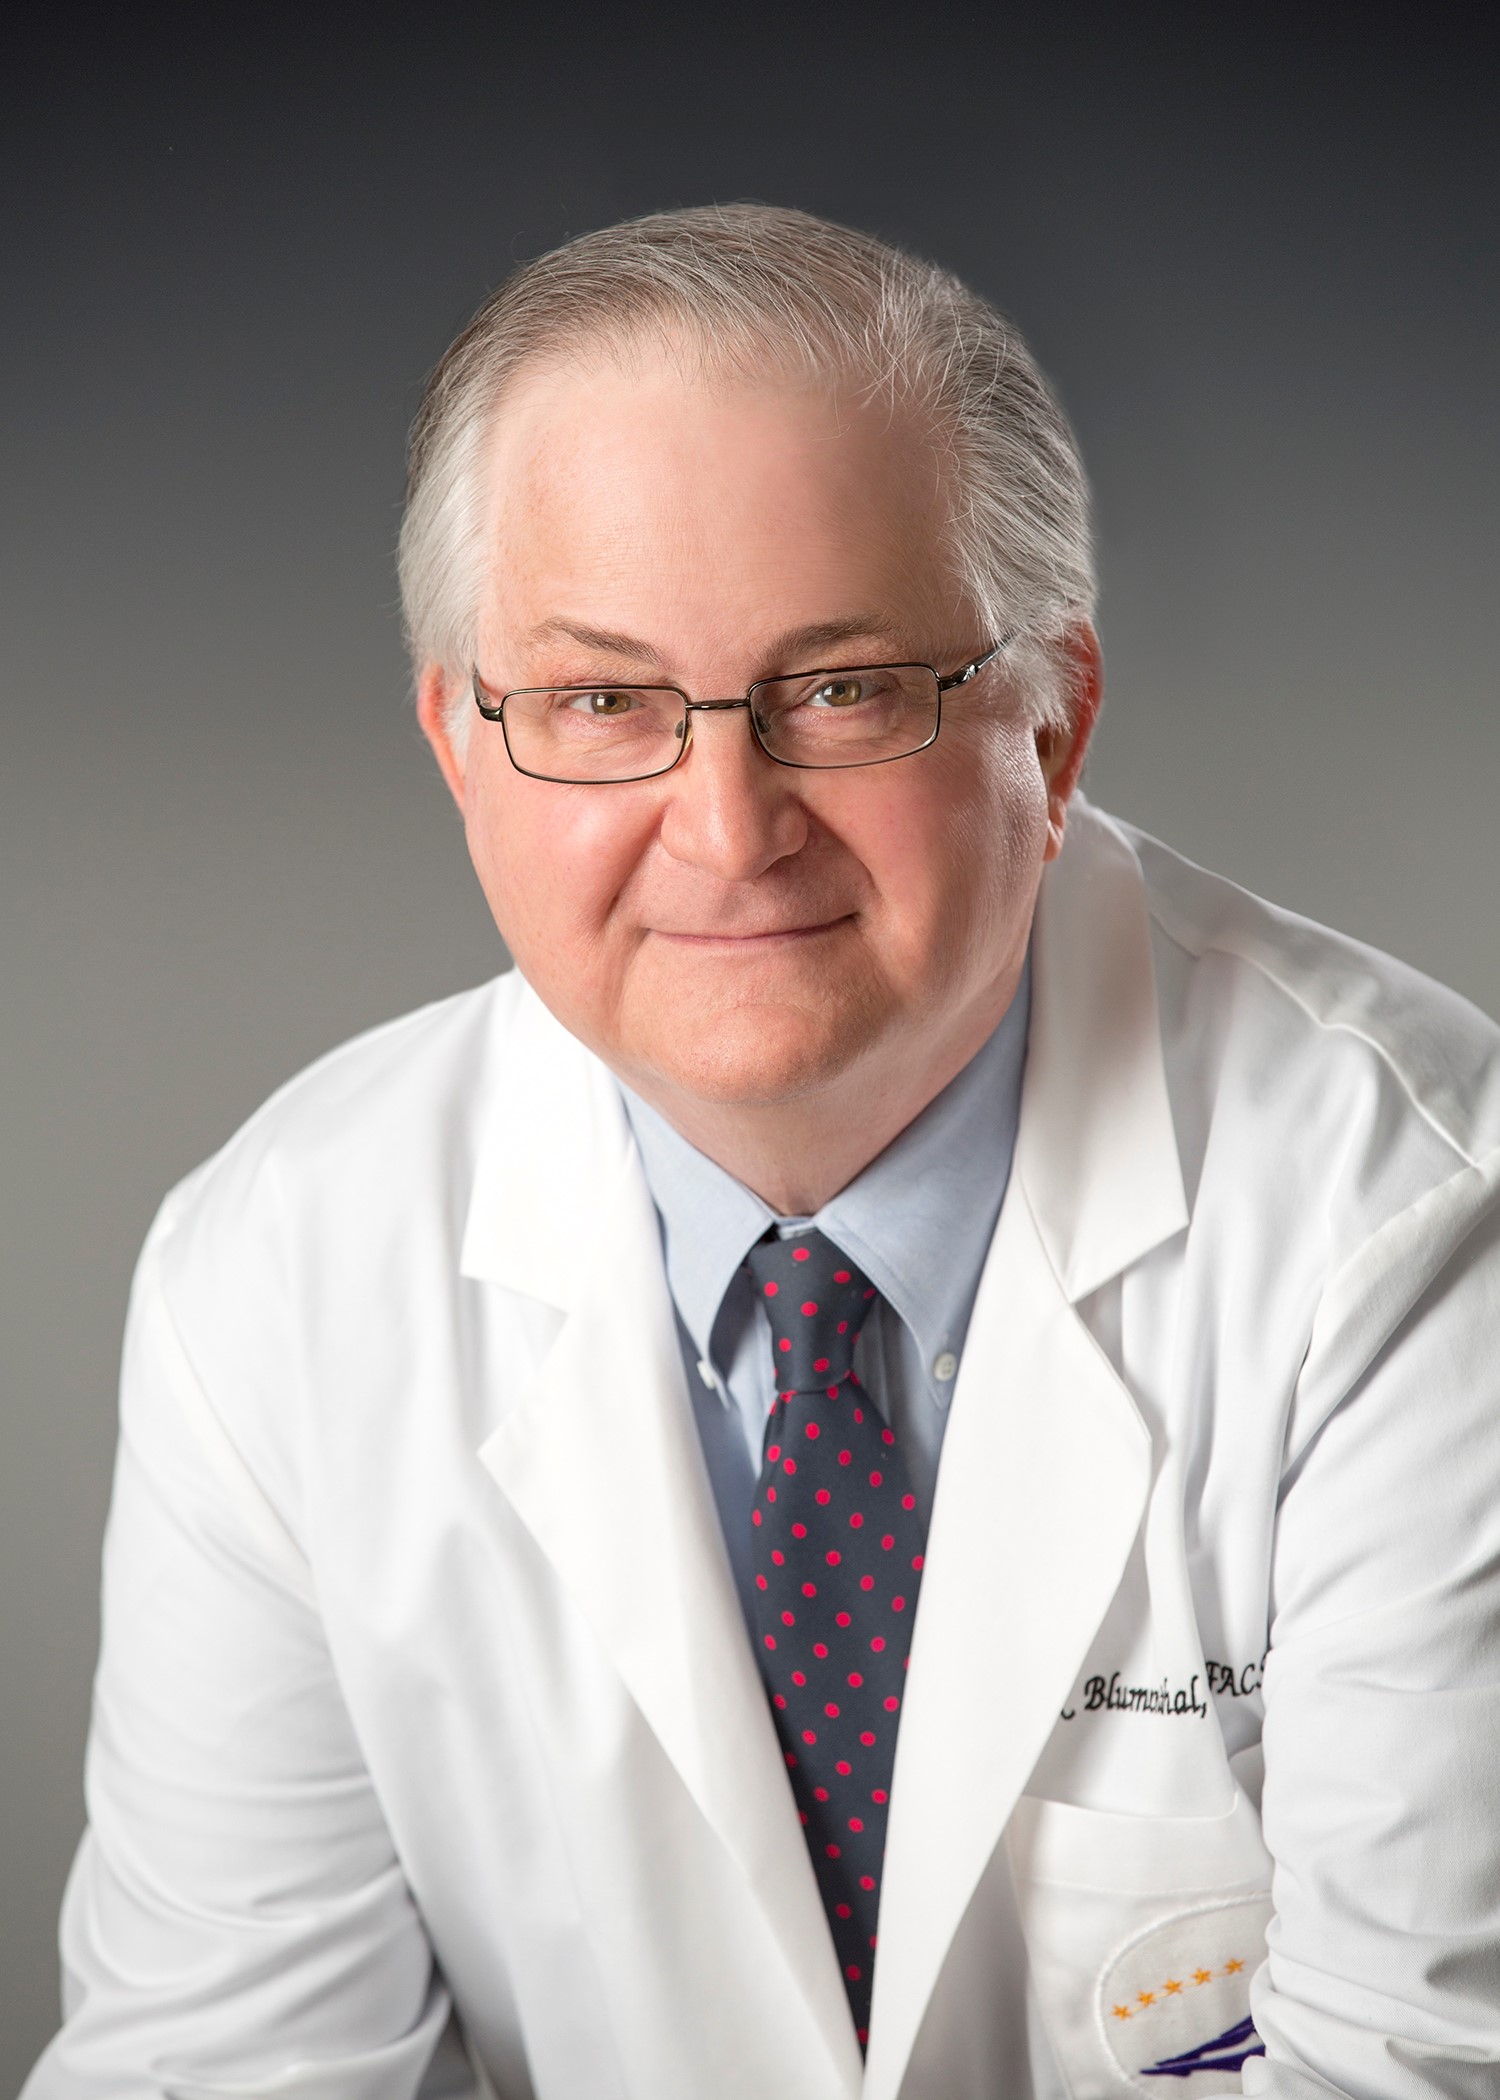 Dr. Mark Blumenthal of the Vein Center & CosMed in St. Louis, MO.